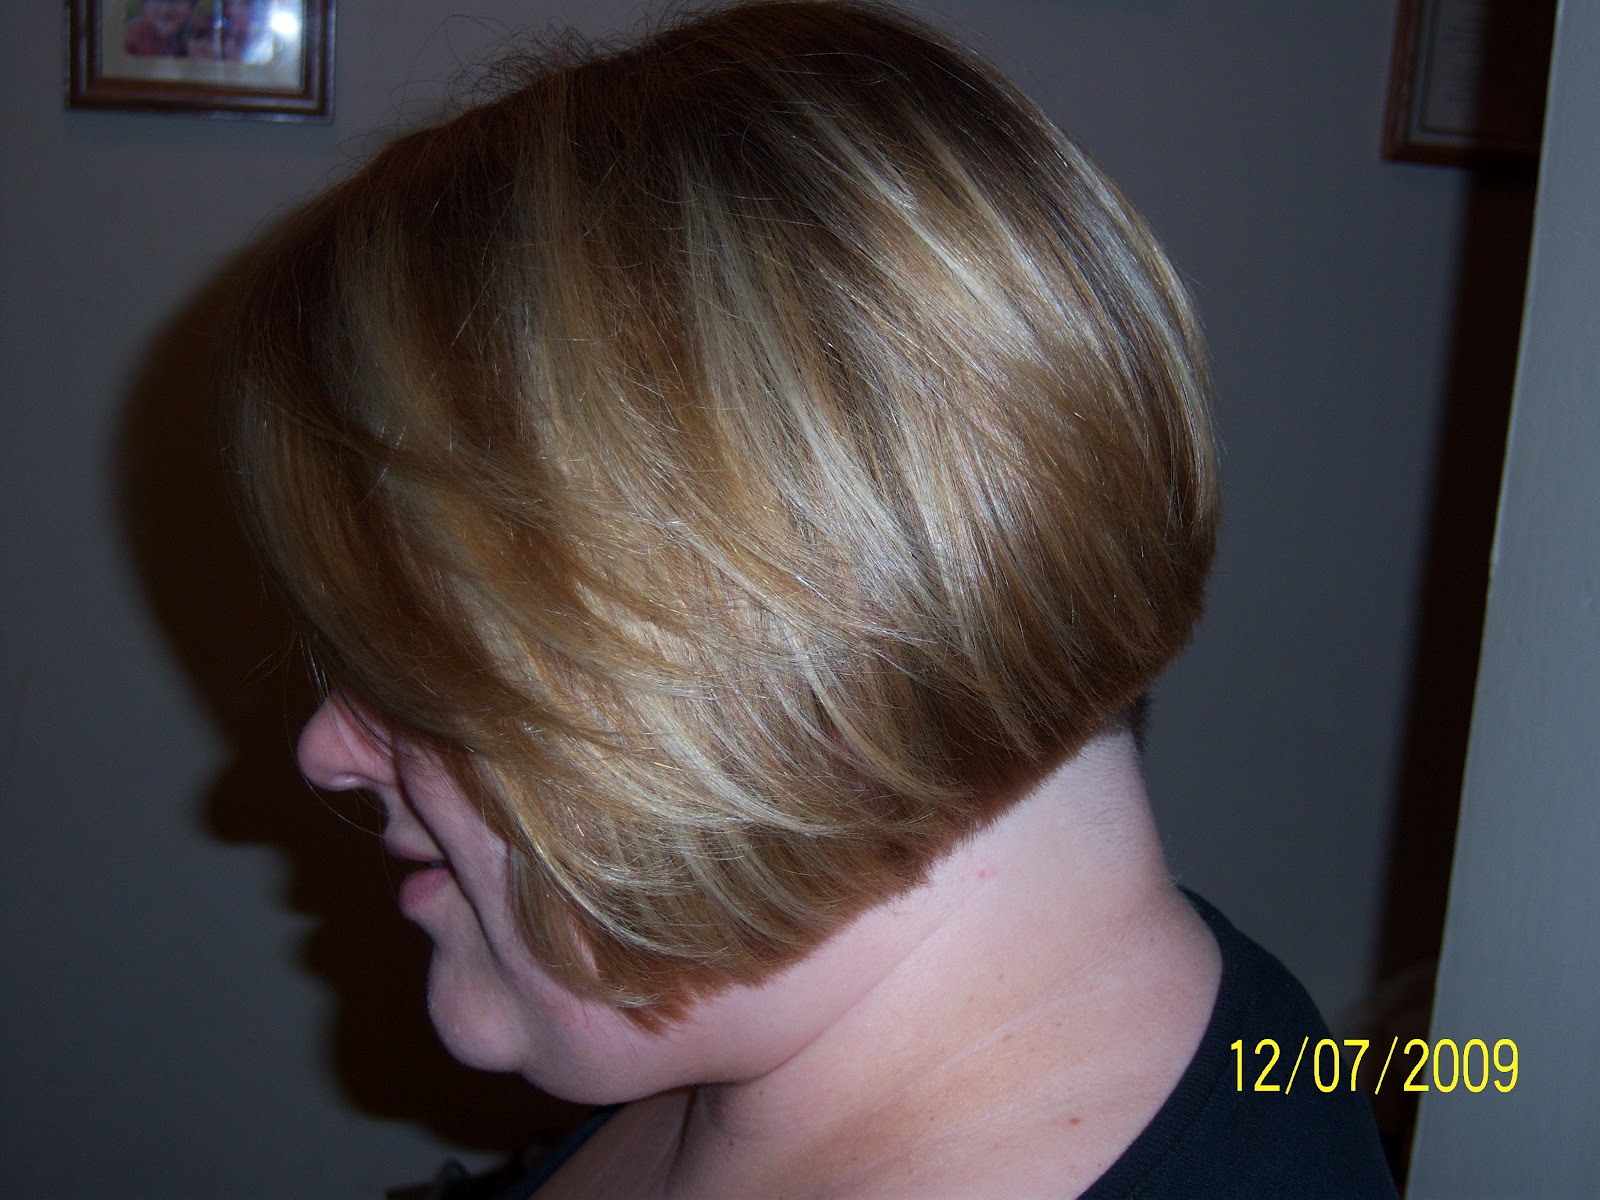 --- We did IT - Undercut and VERY short.